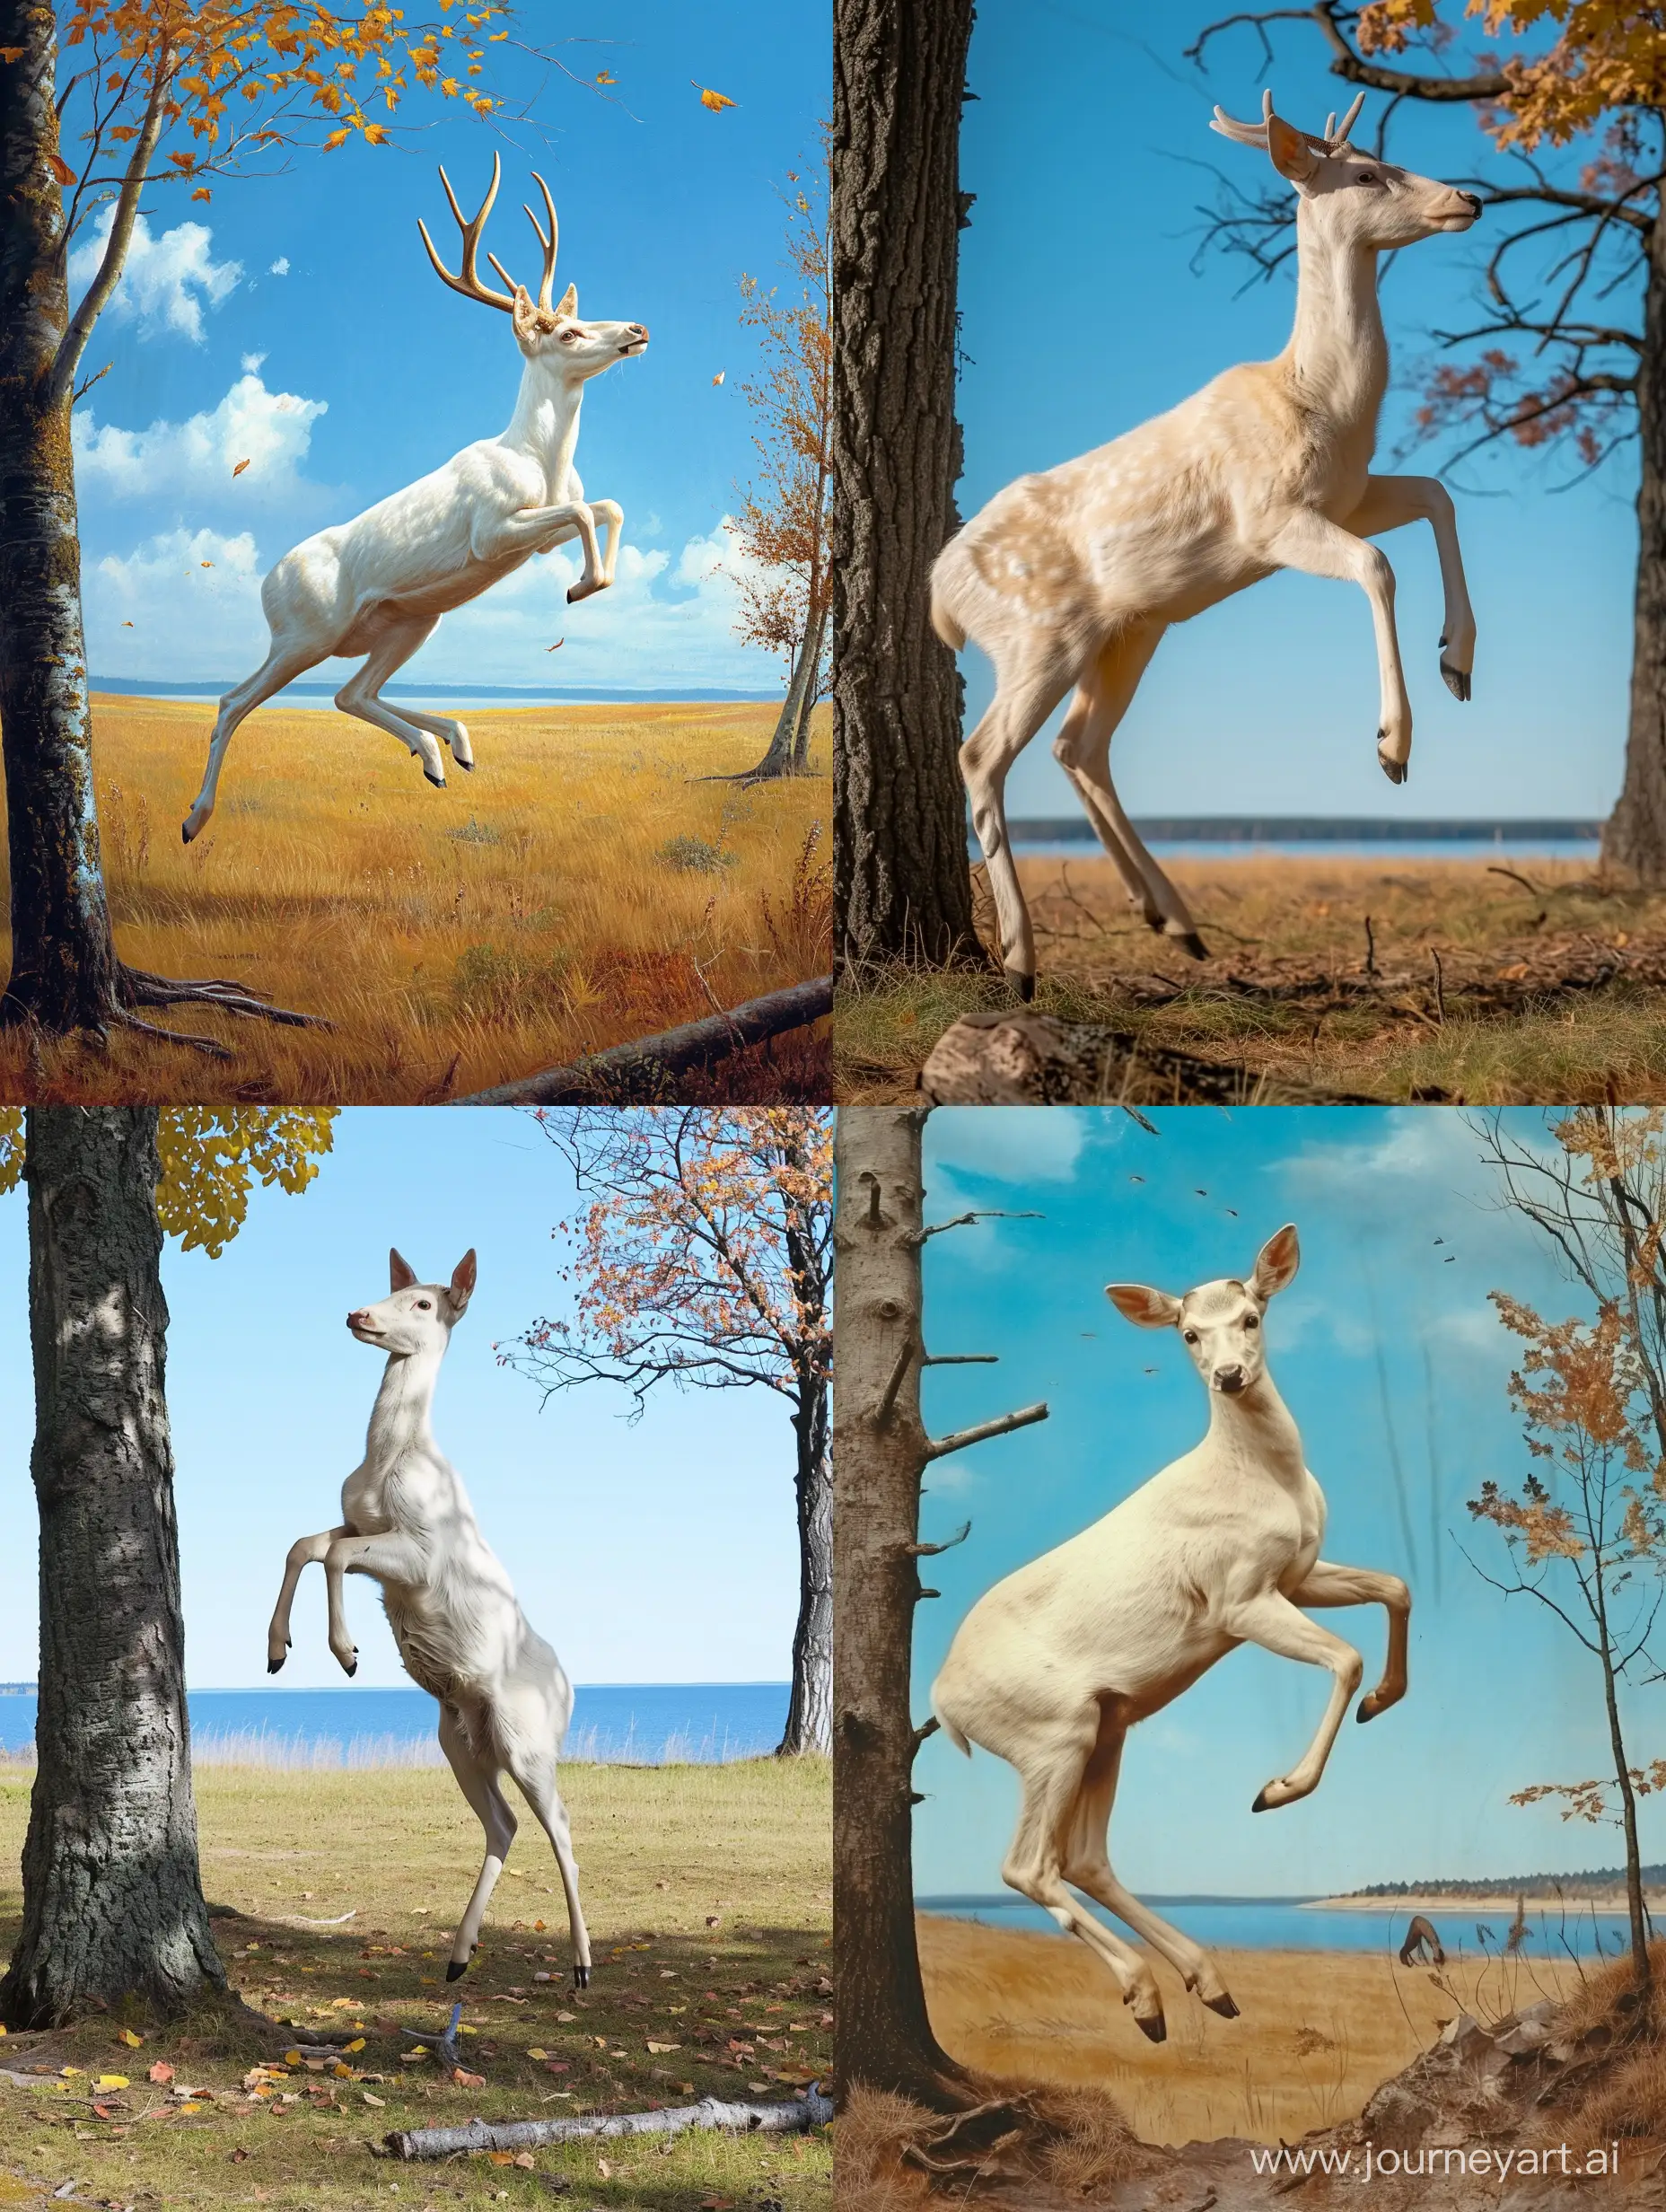 Subject: White deer standing on back legs and front legs in air, like ready  to jump

Location:  open  field with one trunk on left side and two trees on right side of image, time of year is autumn. There is vivid blue sky and lake in distant.